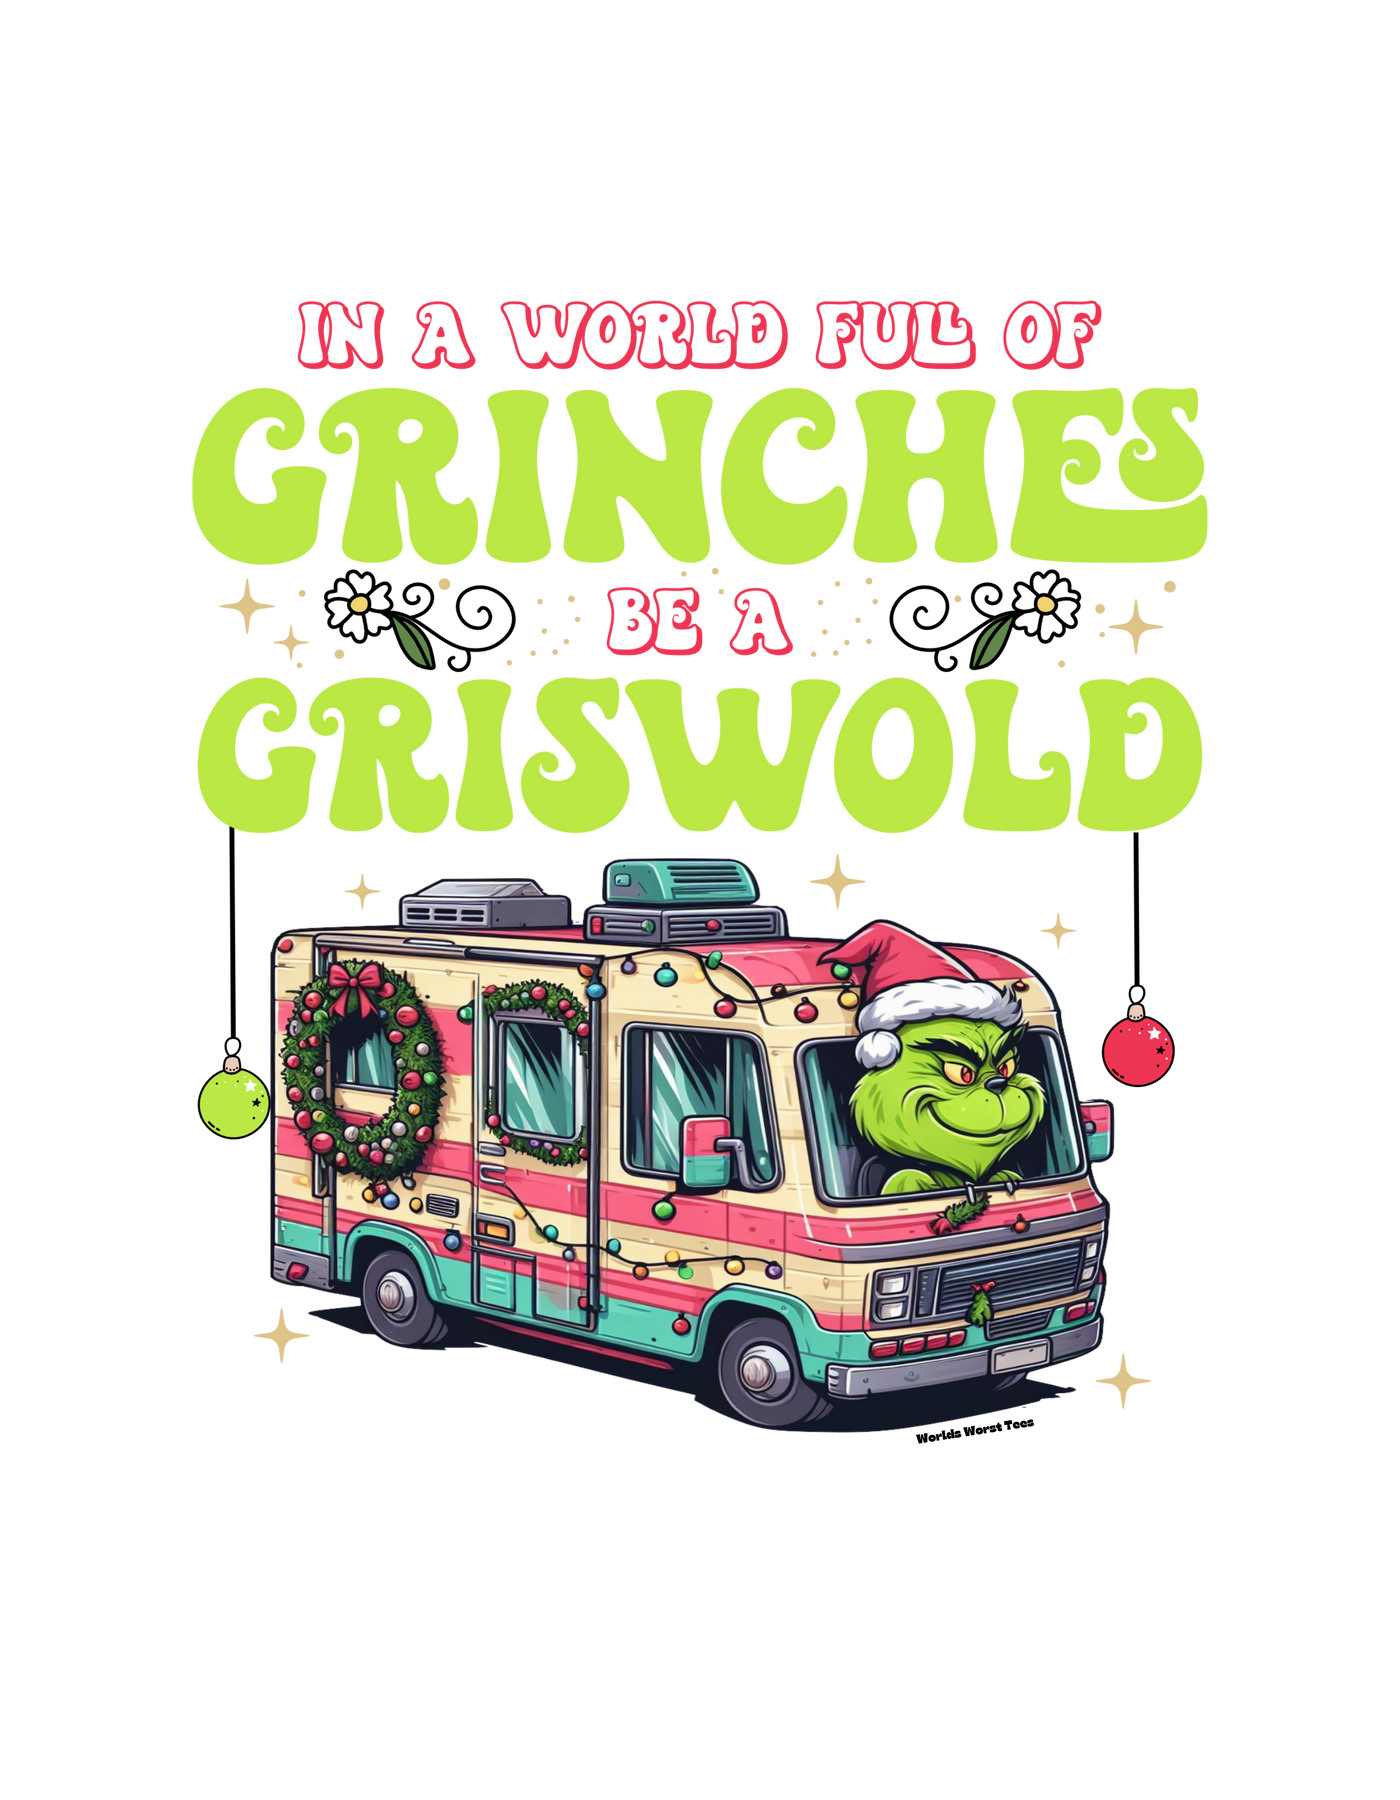 Be a Griswold Crew